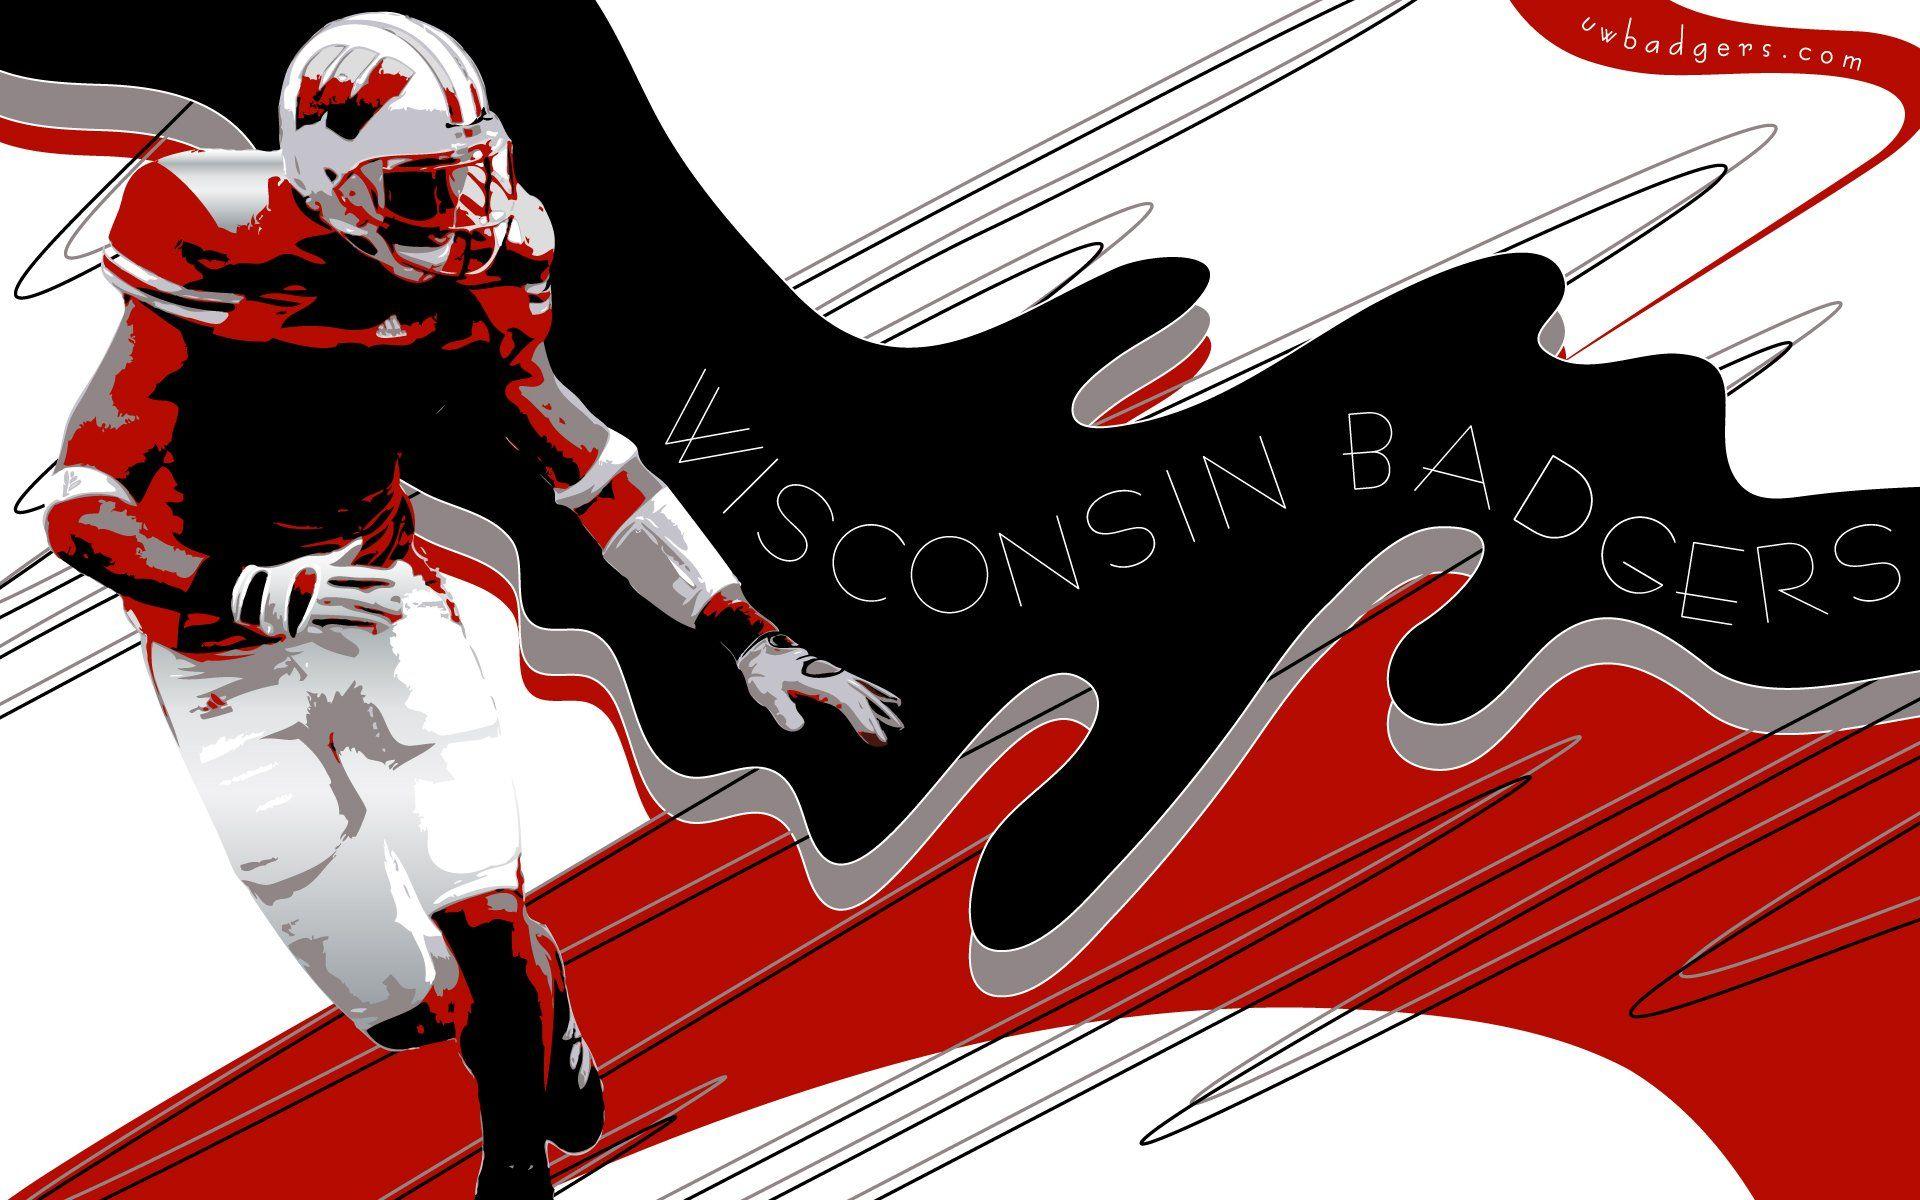 Wisconsin Badger Wallpapers / Email my2thumbz@gmail.com with your team